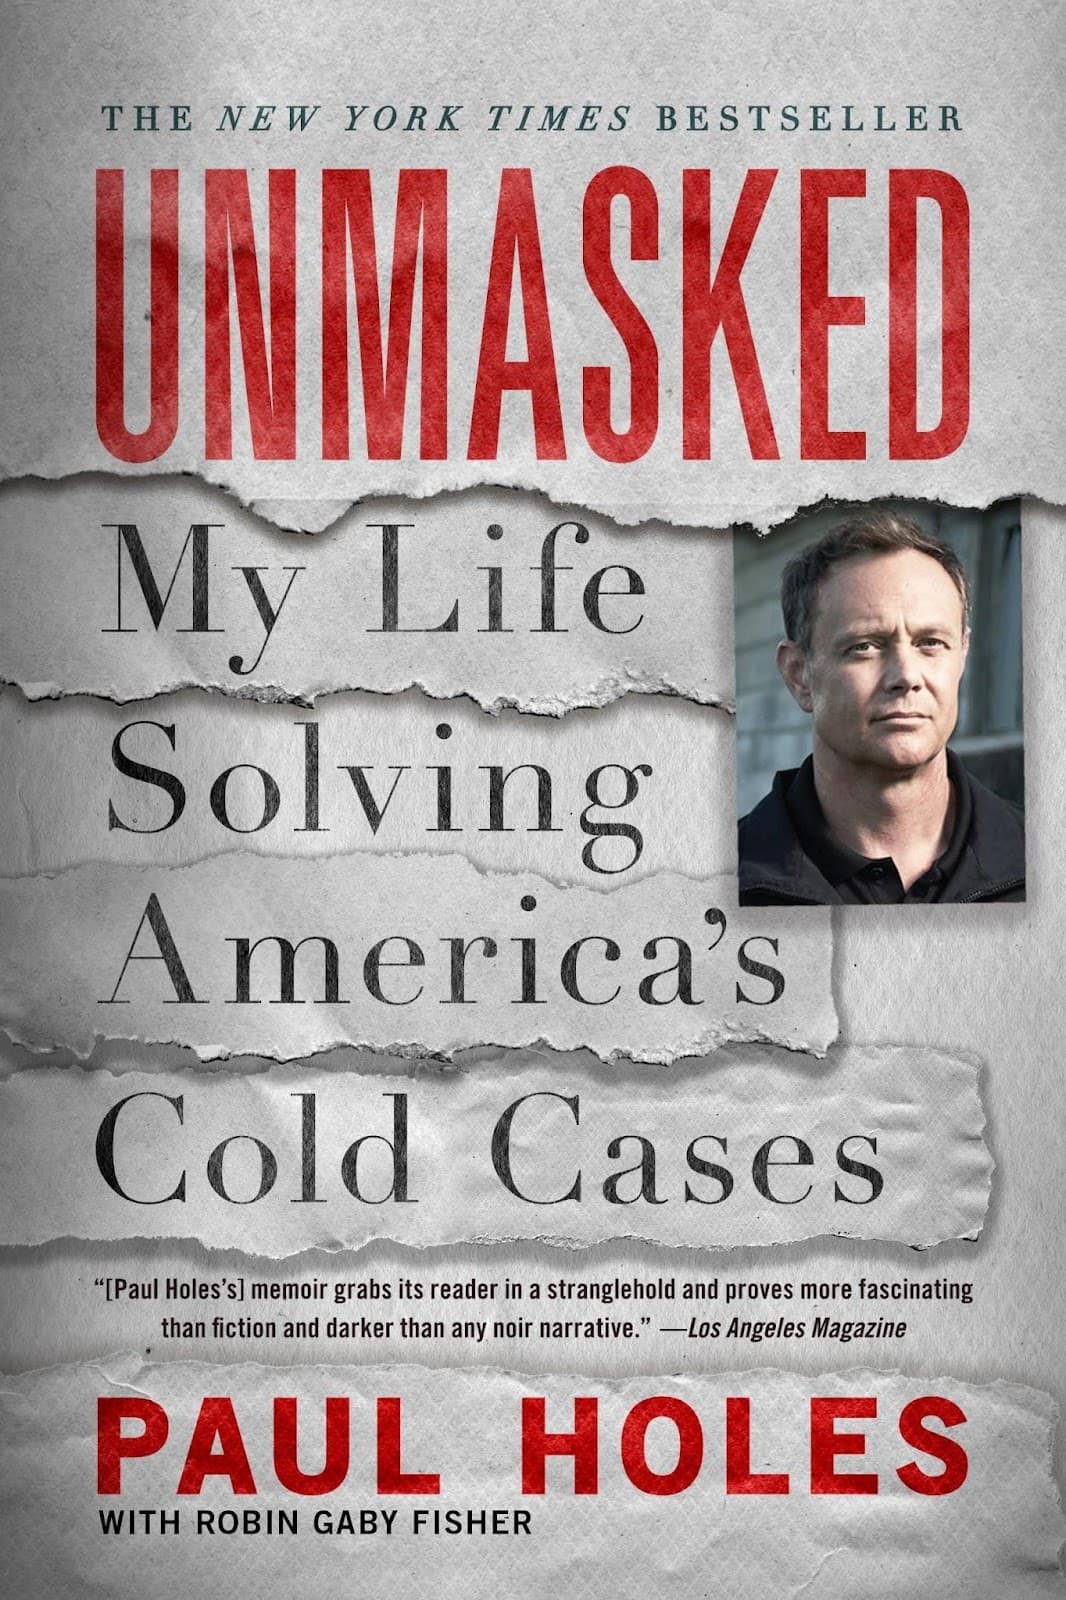 Unmasked by Paul Holes: Chasing Shadows of Crime